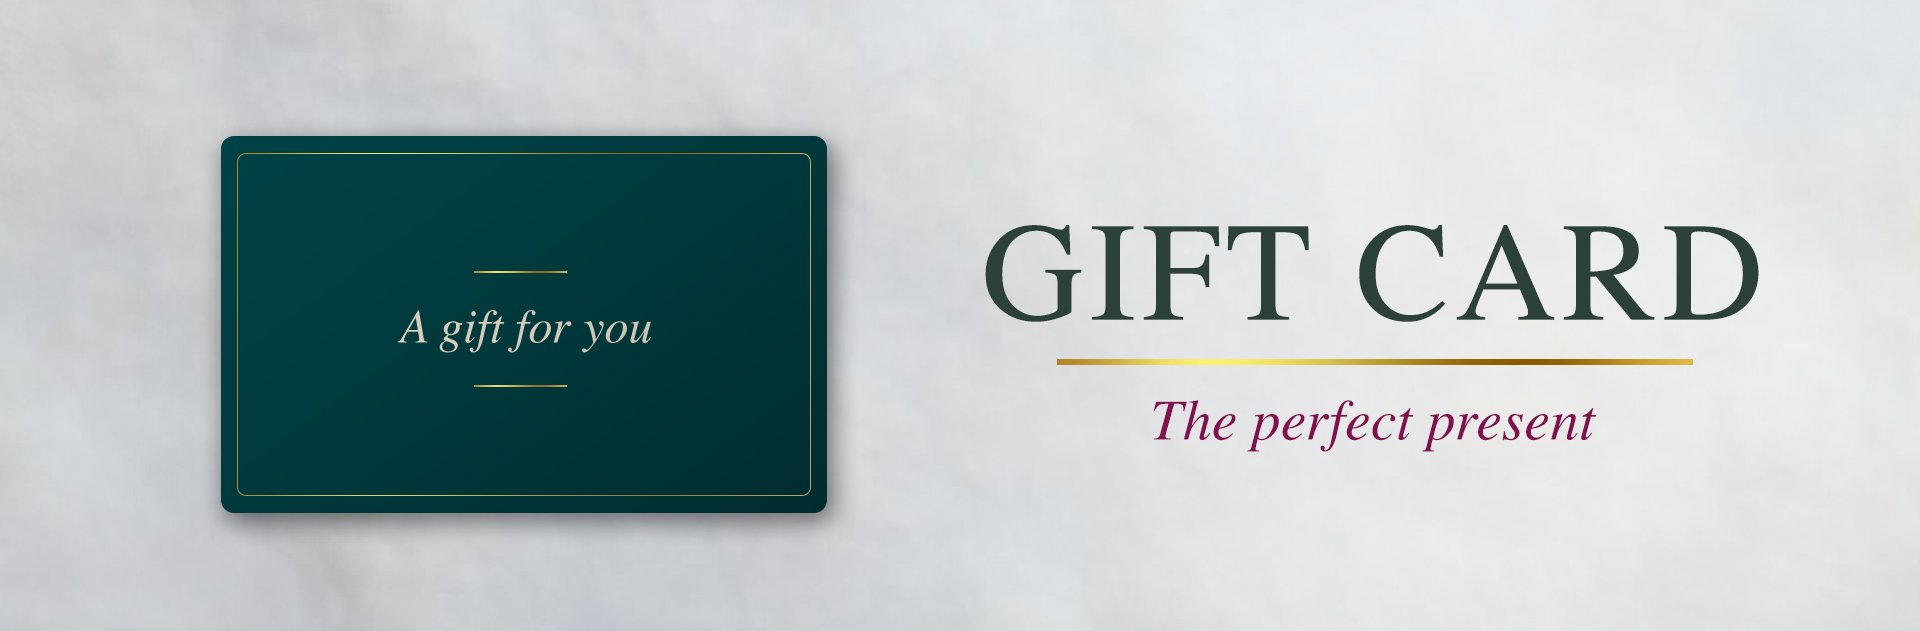 The Old White Horse Gift Card